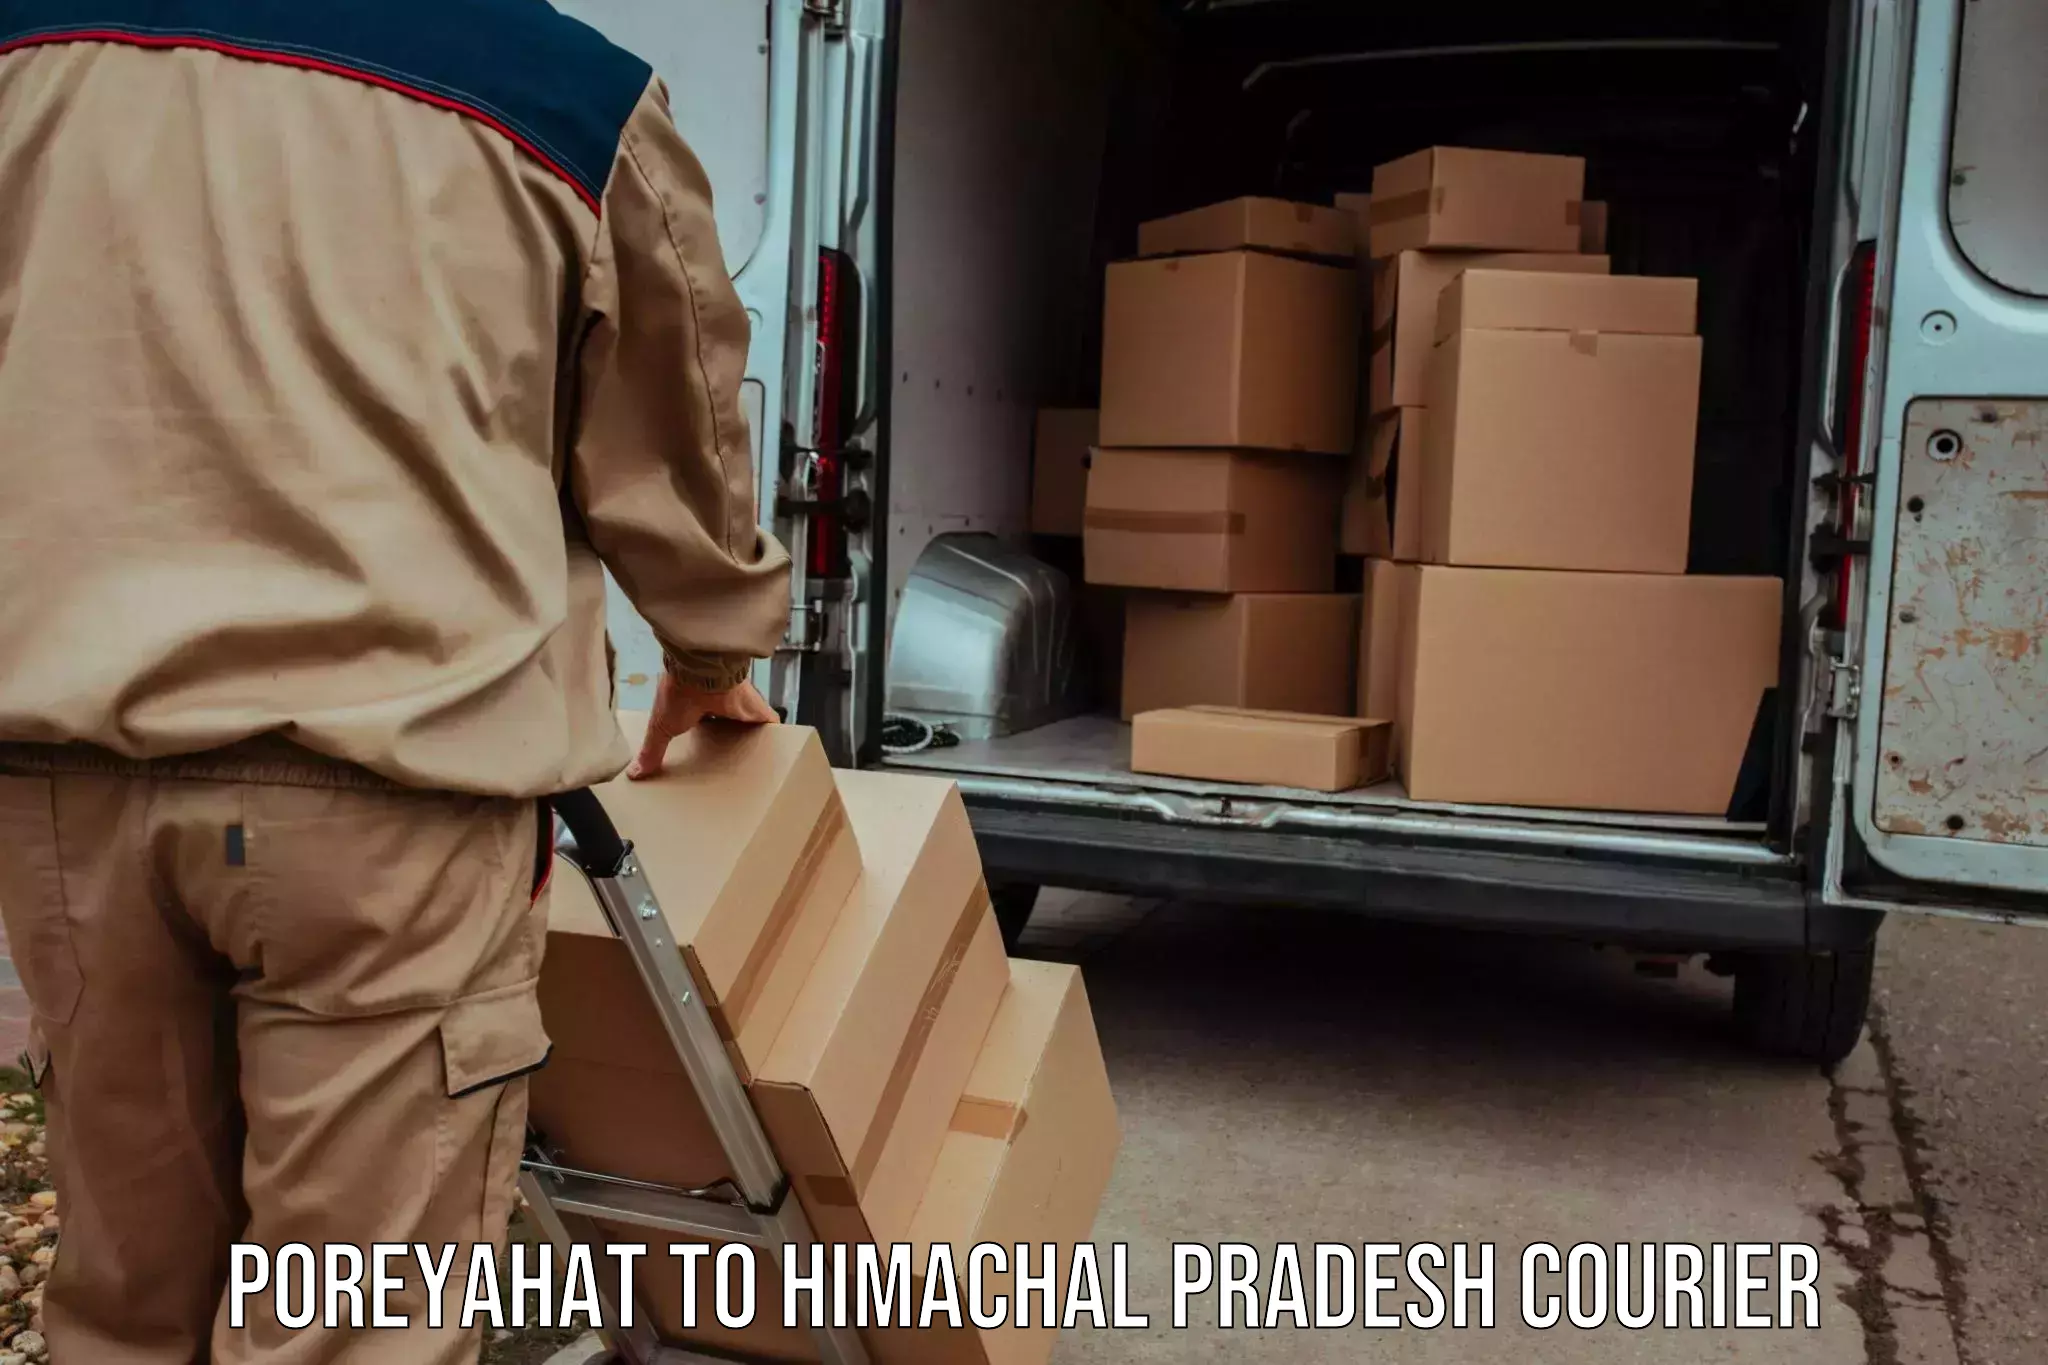 Express delivery capabilities Poreyahat to Himachal Pradesh